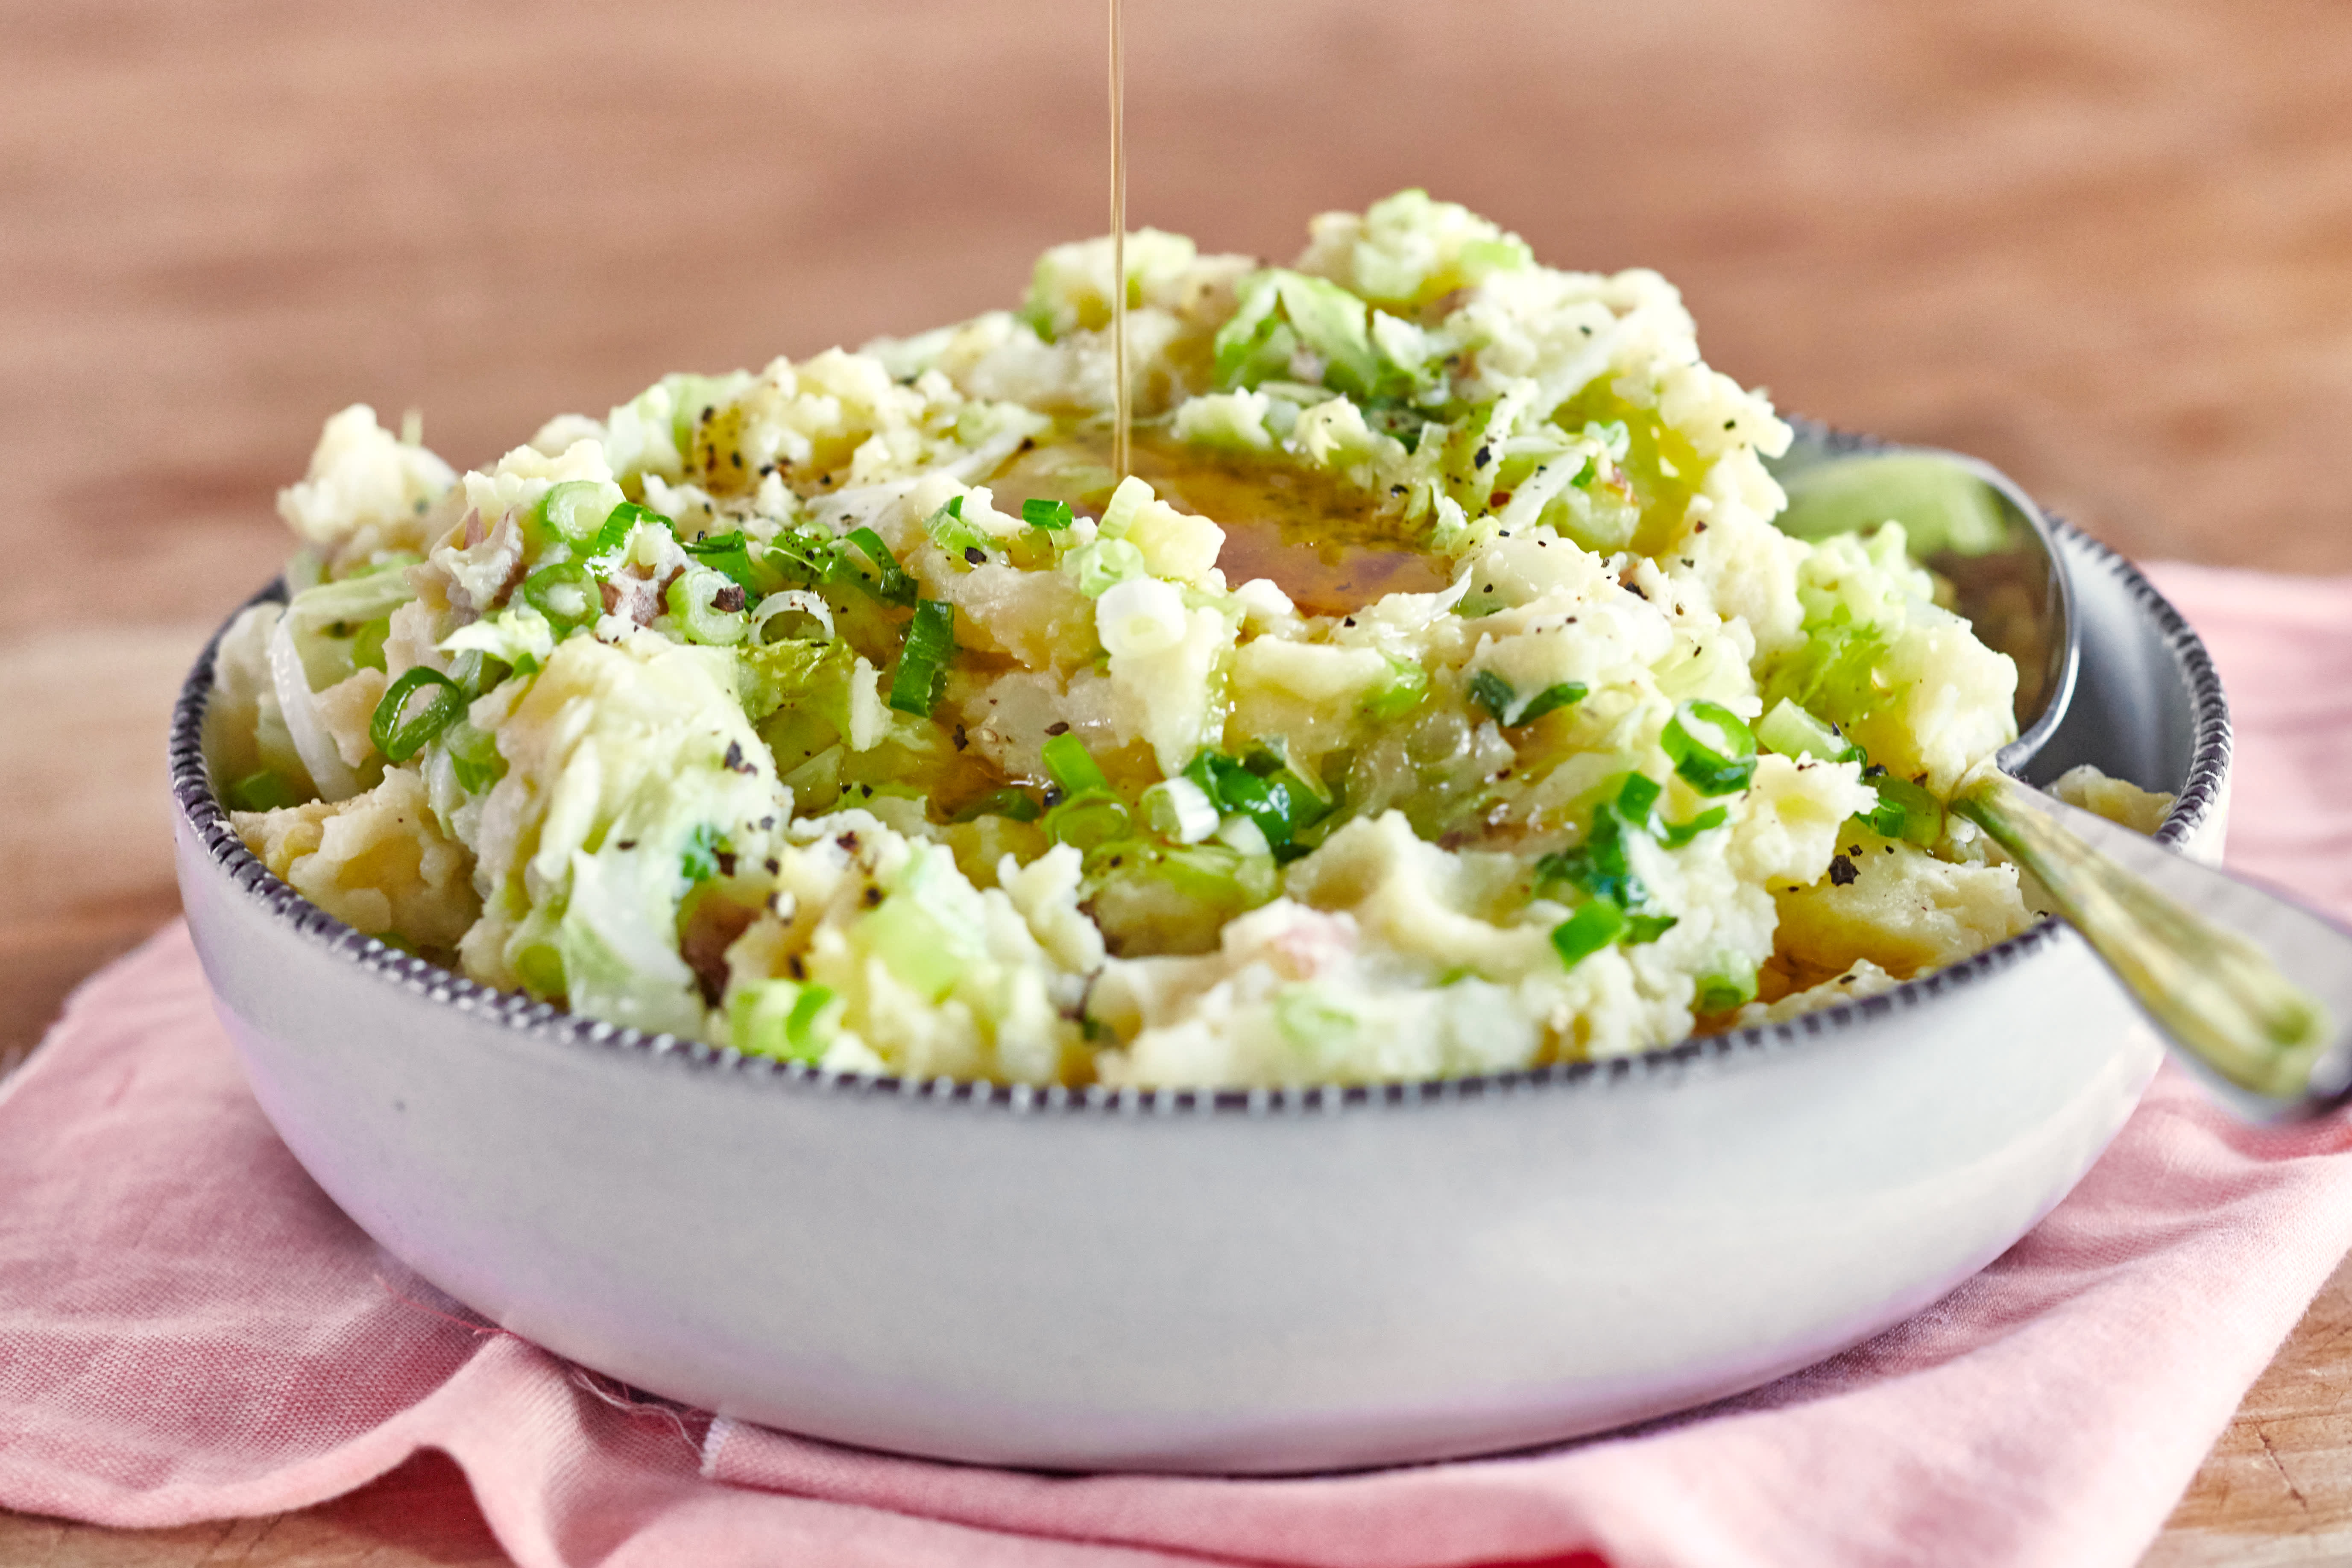 How To Make Colcannon (Irish Potatoes and Cabbage) | Kitchn